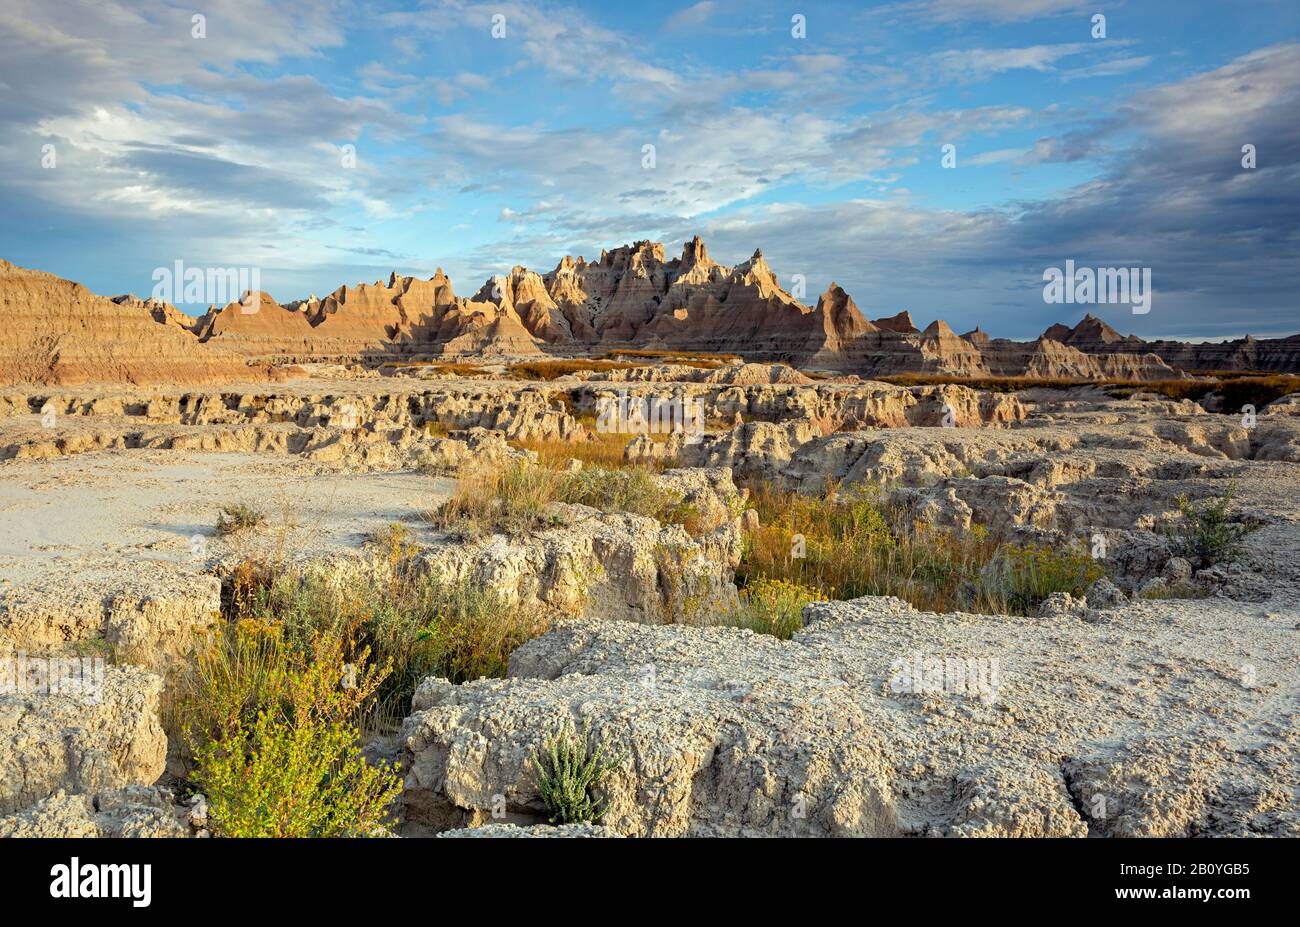 SD00177-00....SOUTH DAKOTA - Early morning near the Fossil Exhibit Trail in Badlands National Park. Stock Photo